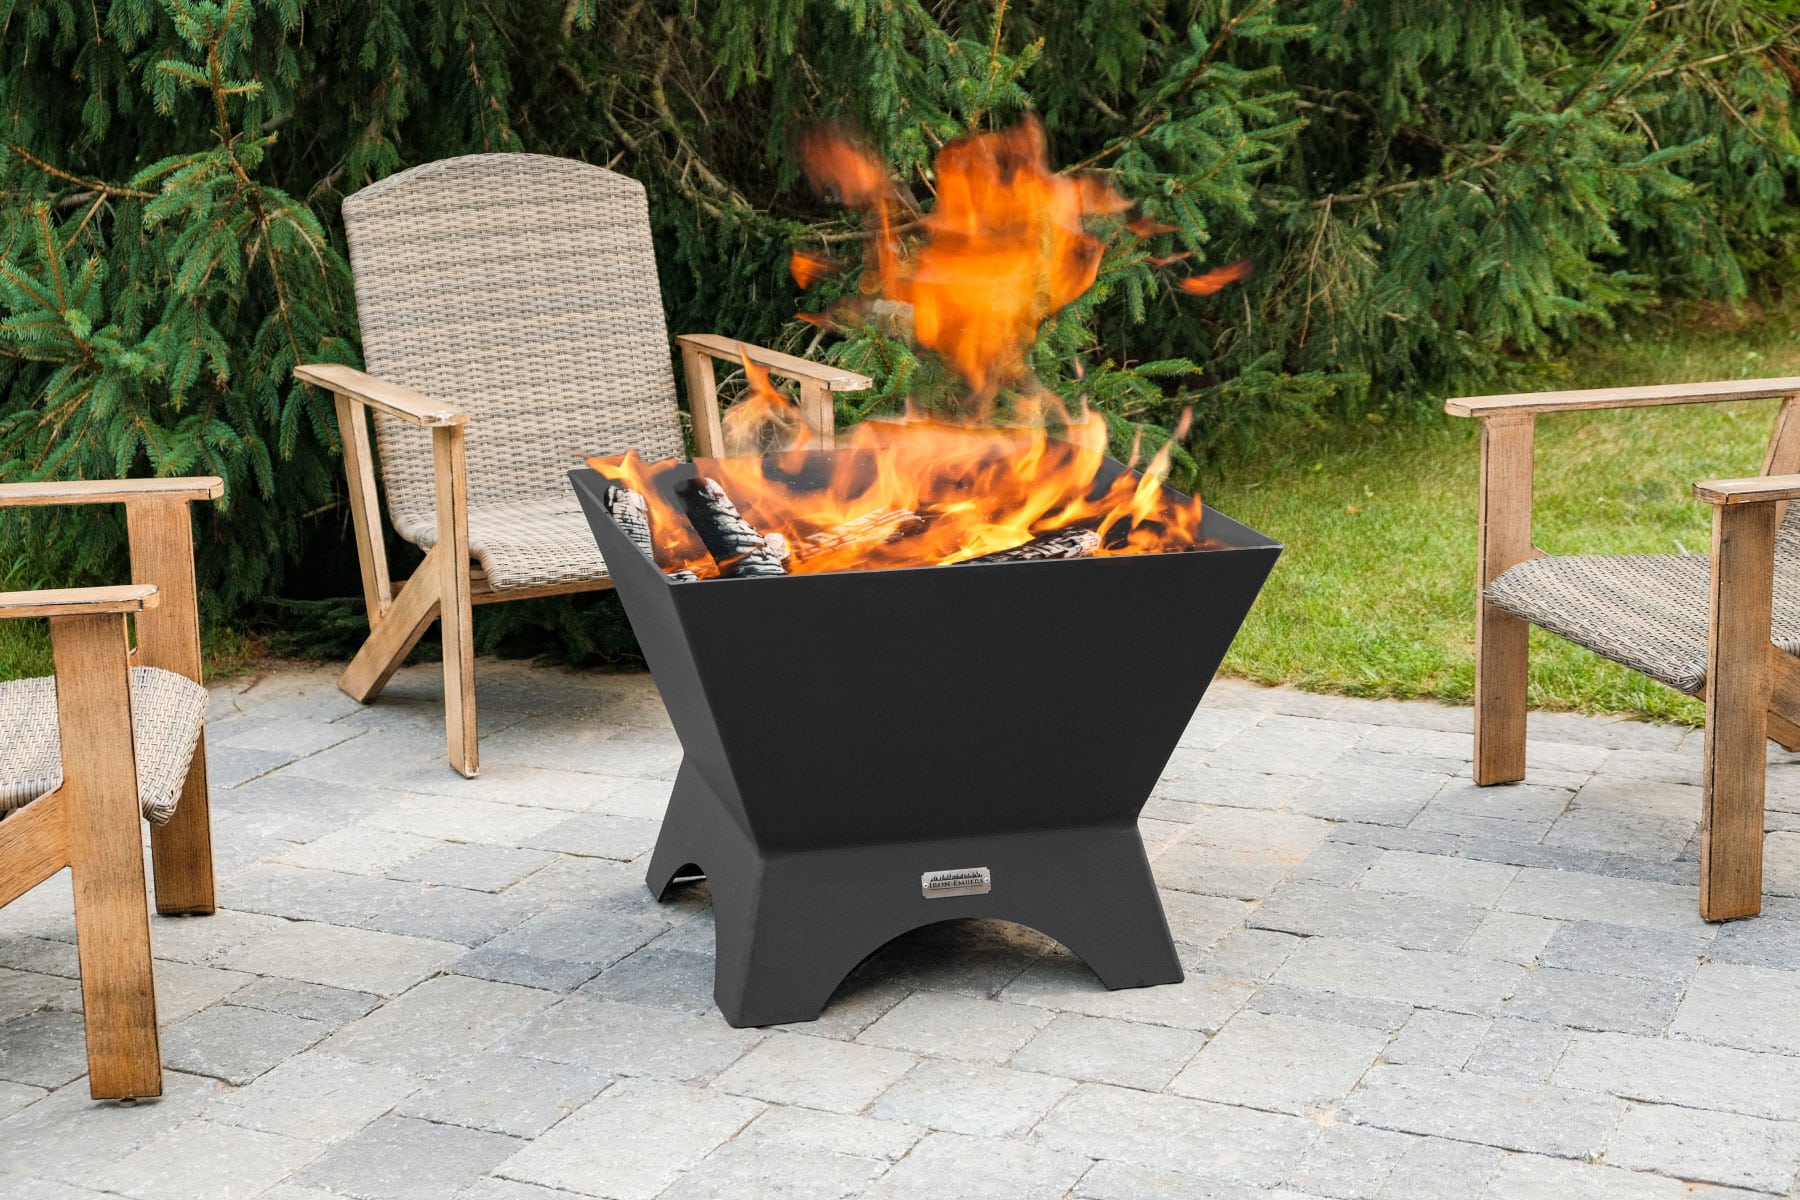 Large 30" modern cube fire pit by Iron Embers